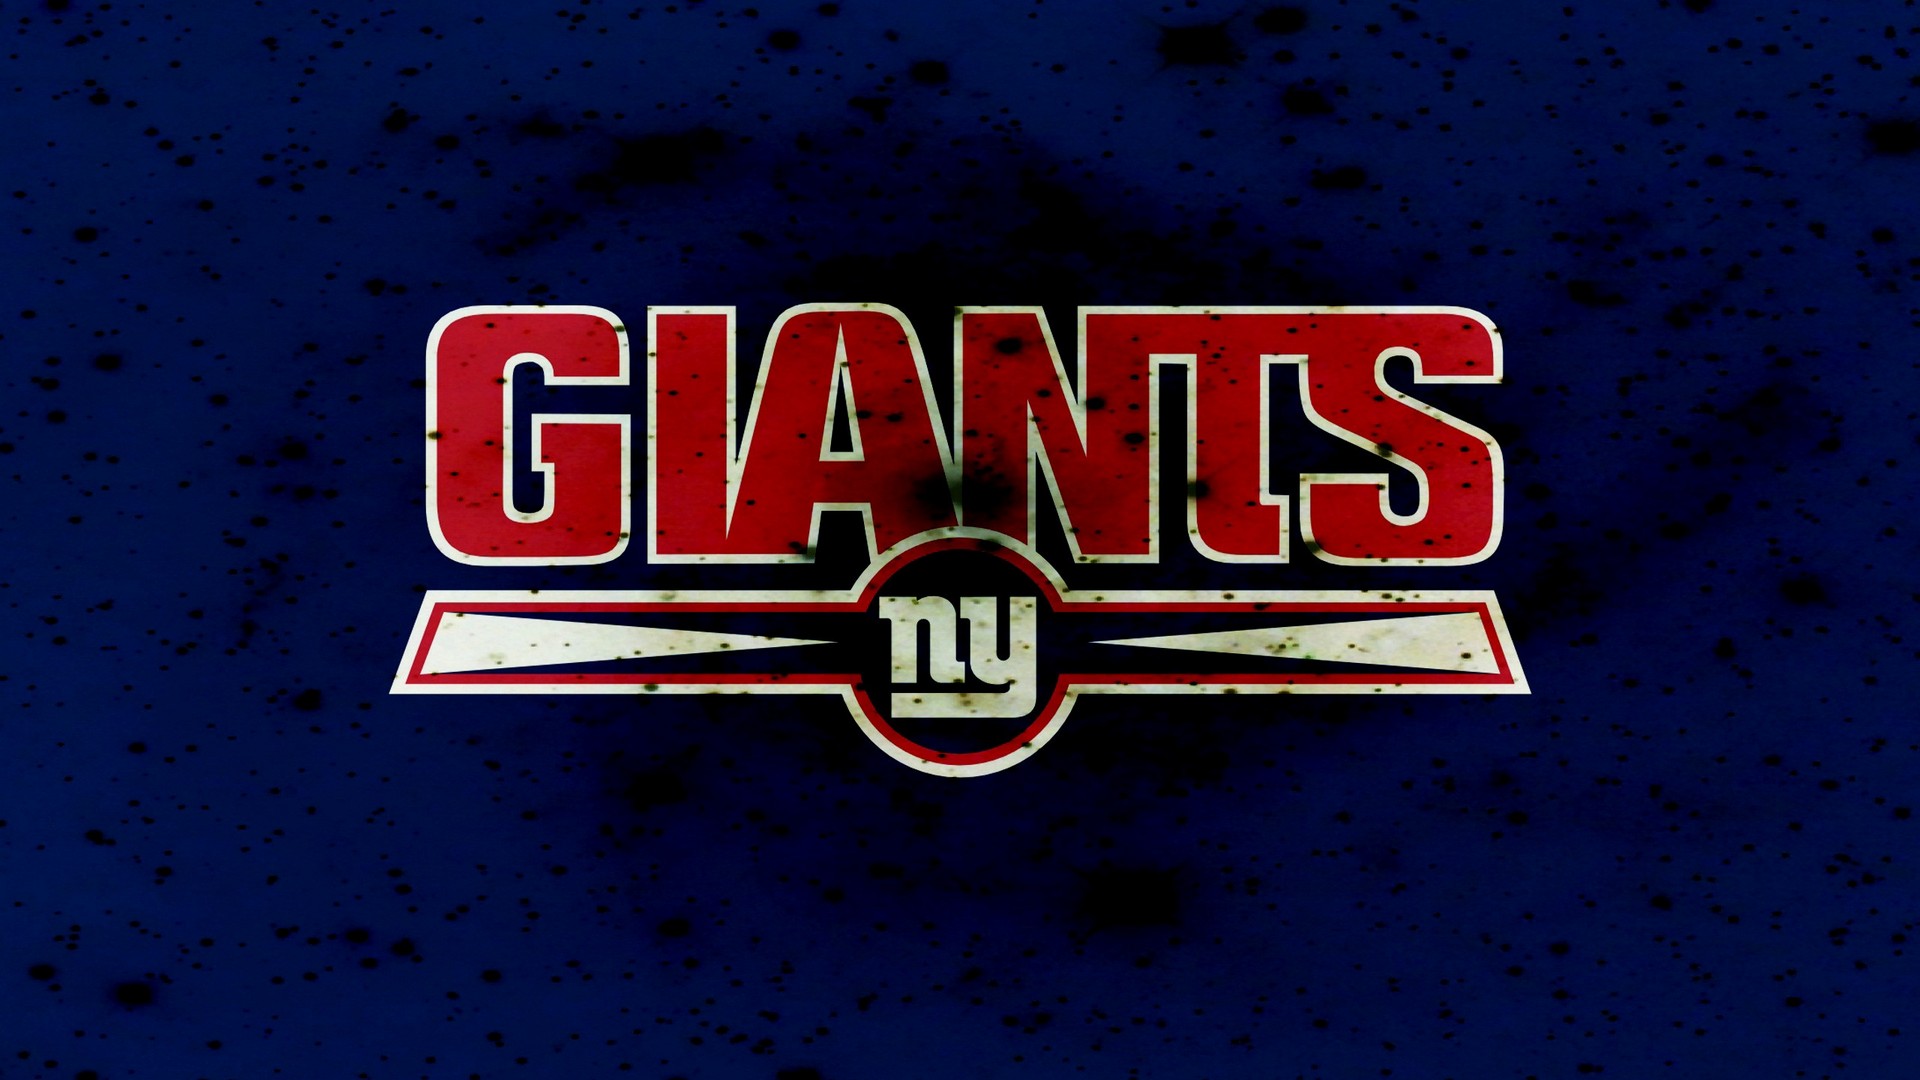 New York Giants Wallpaper HD With Resolution 1920X1080